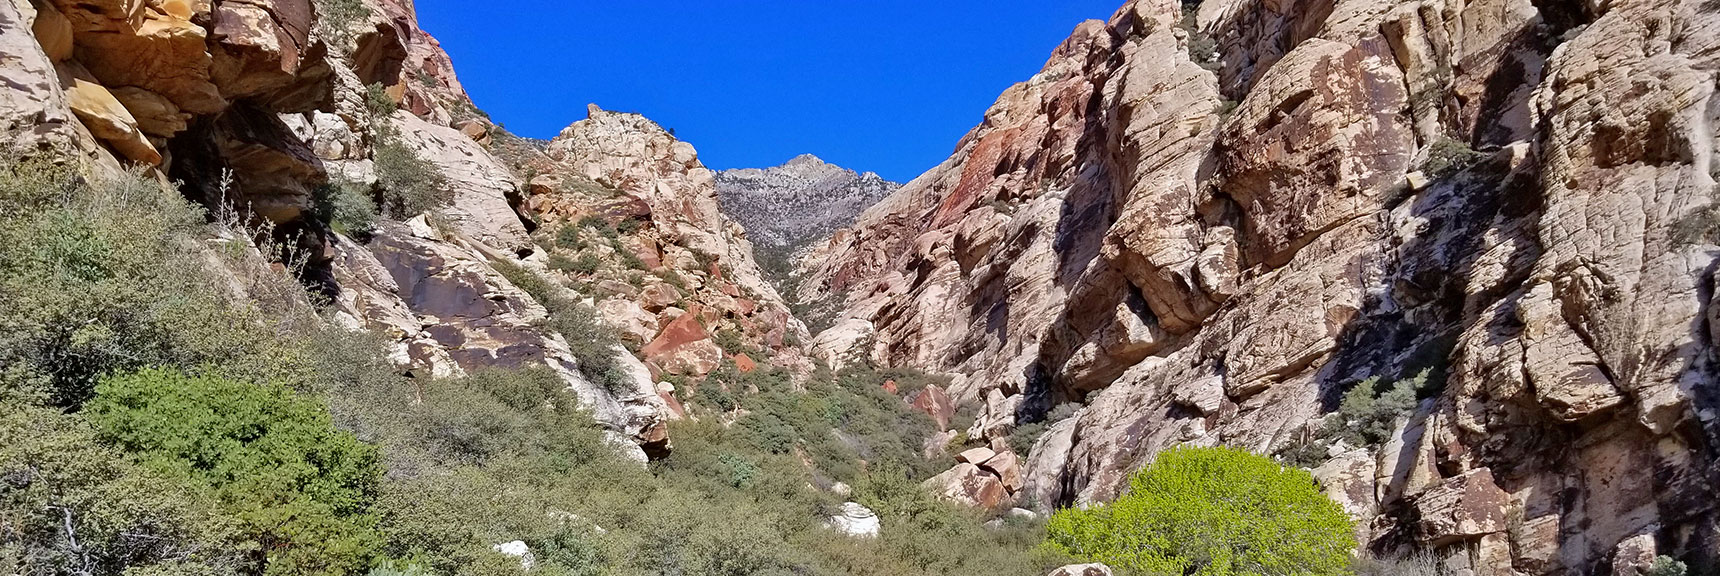 First Creek Canyon Between Indecision Peak and Mt. Wilson in Rainbow Mountain Wilderness, Nevada